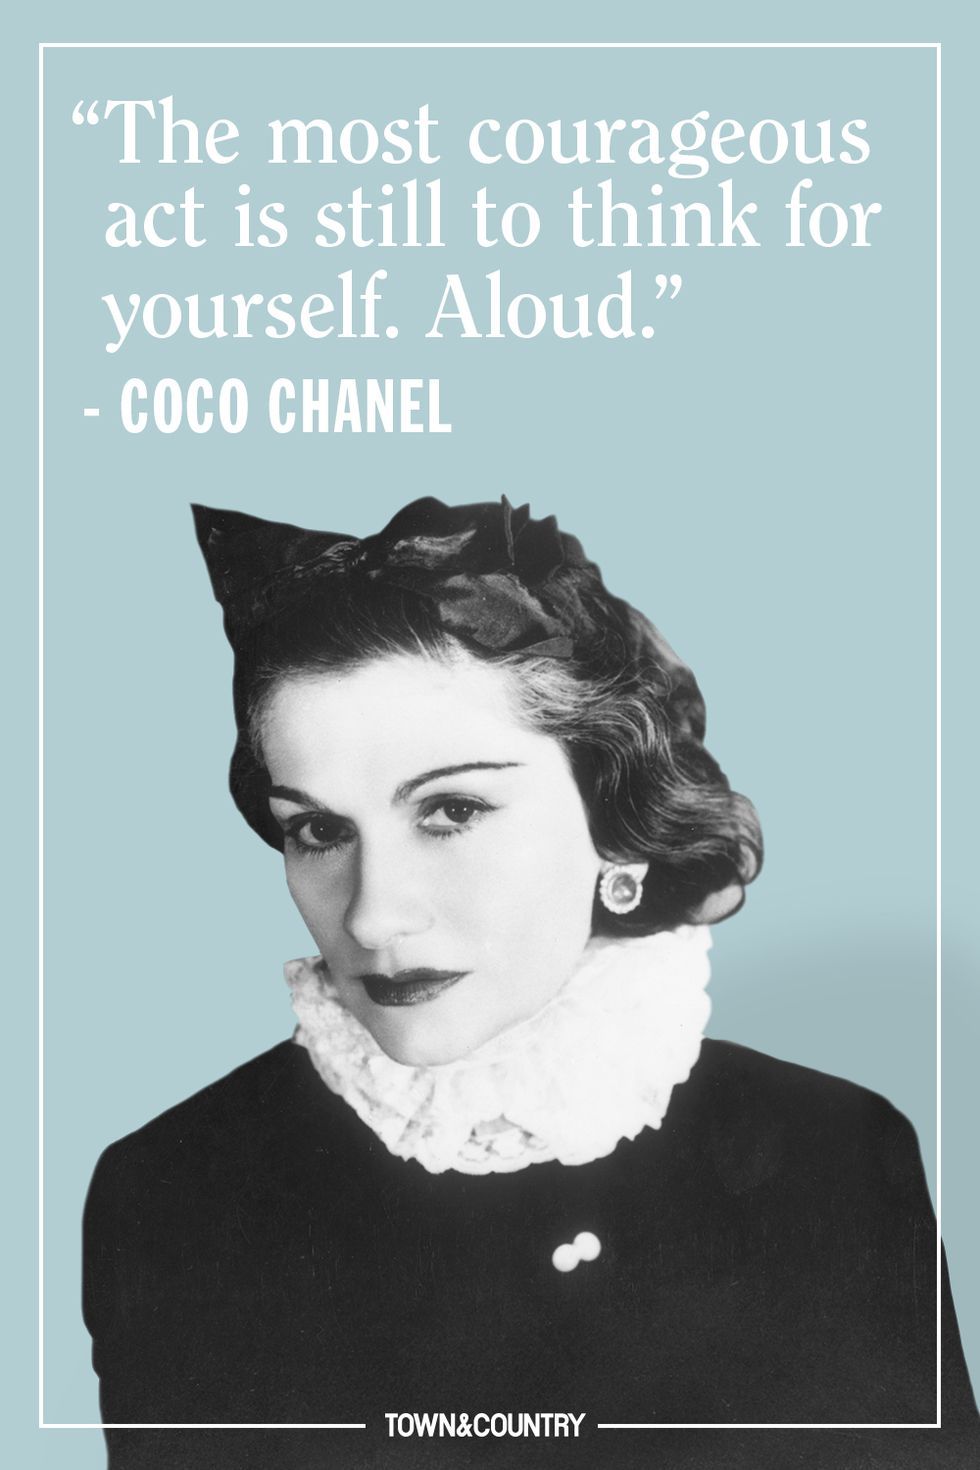 Kviksølv interferens Bedstefar 25 Coco Chanel Quotes Every Woman Should Live By - Best Coco Chanel Sayings